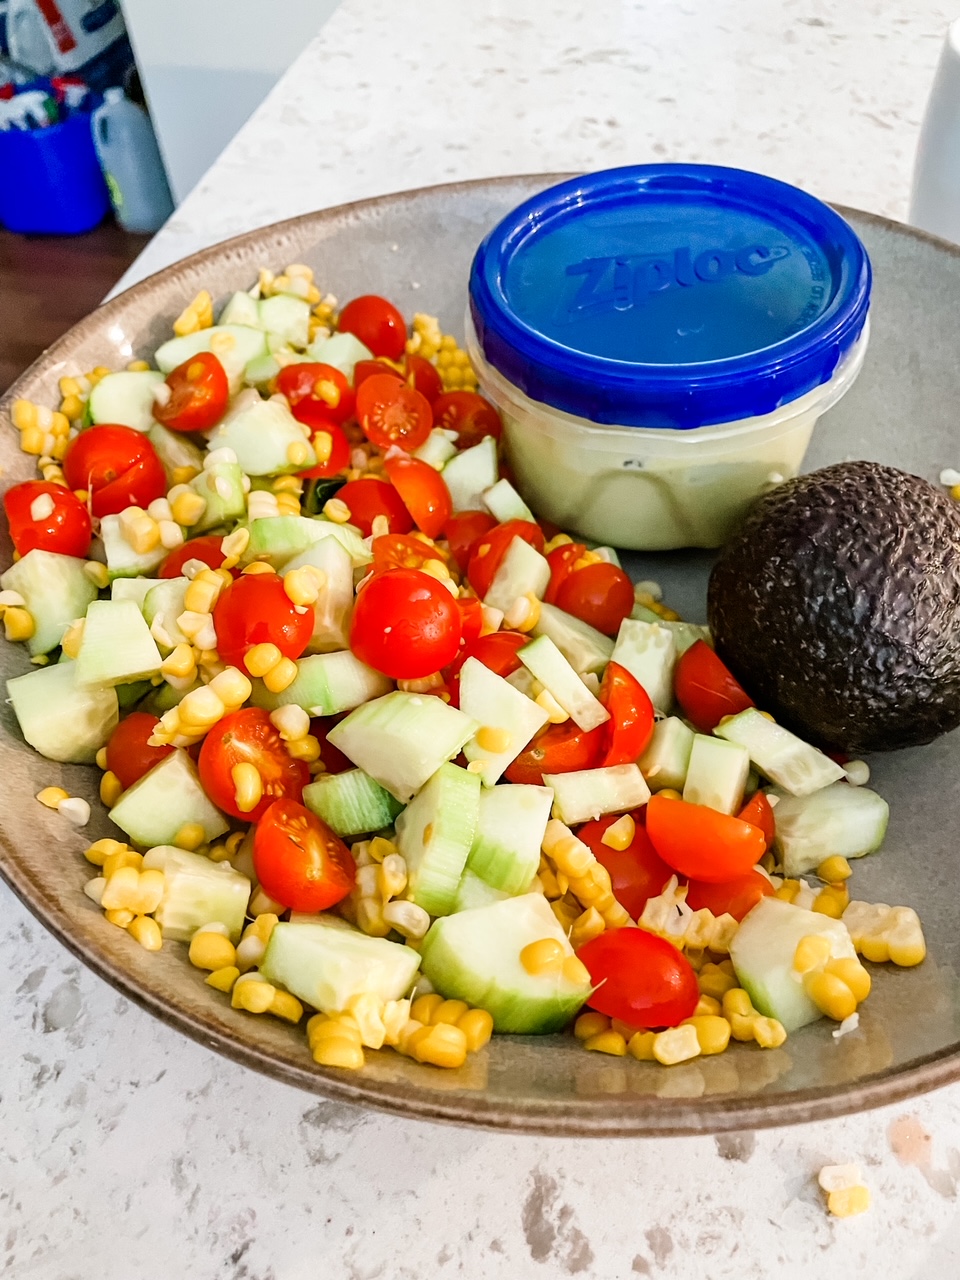 The Cucumber, Corn and Tomato Salad with Easy Avocado Dressing assembled to be taken on-the-go